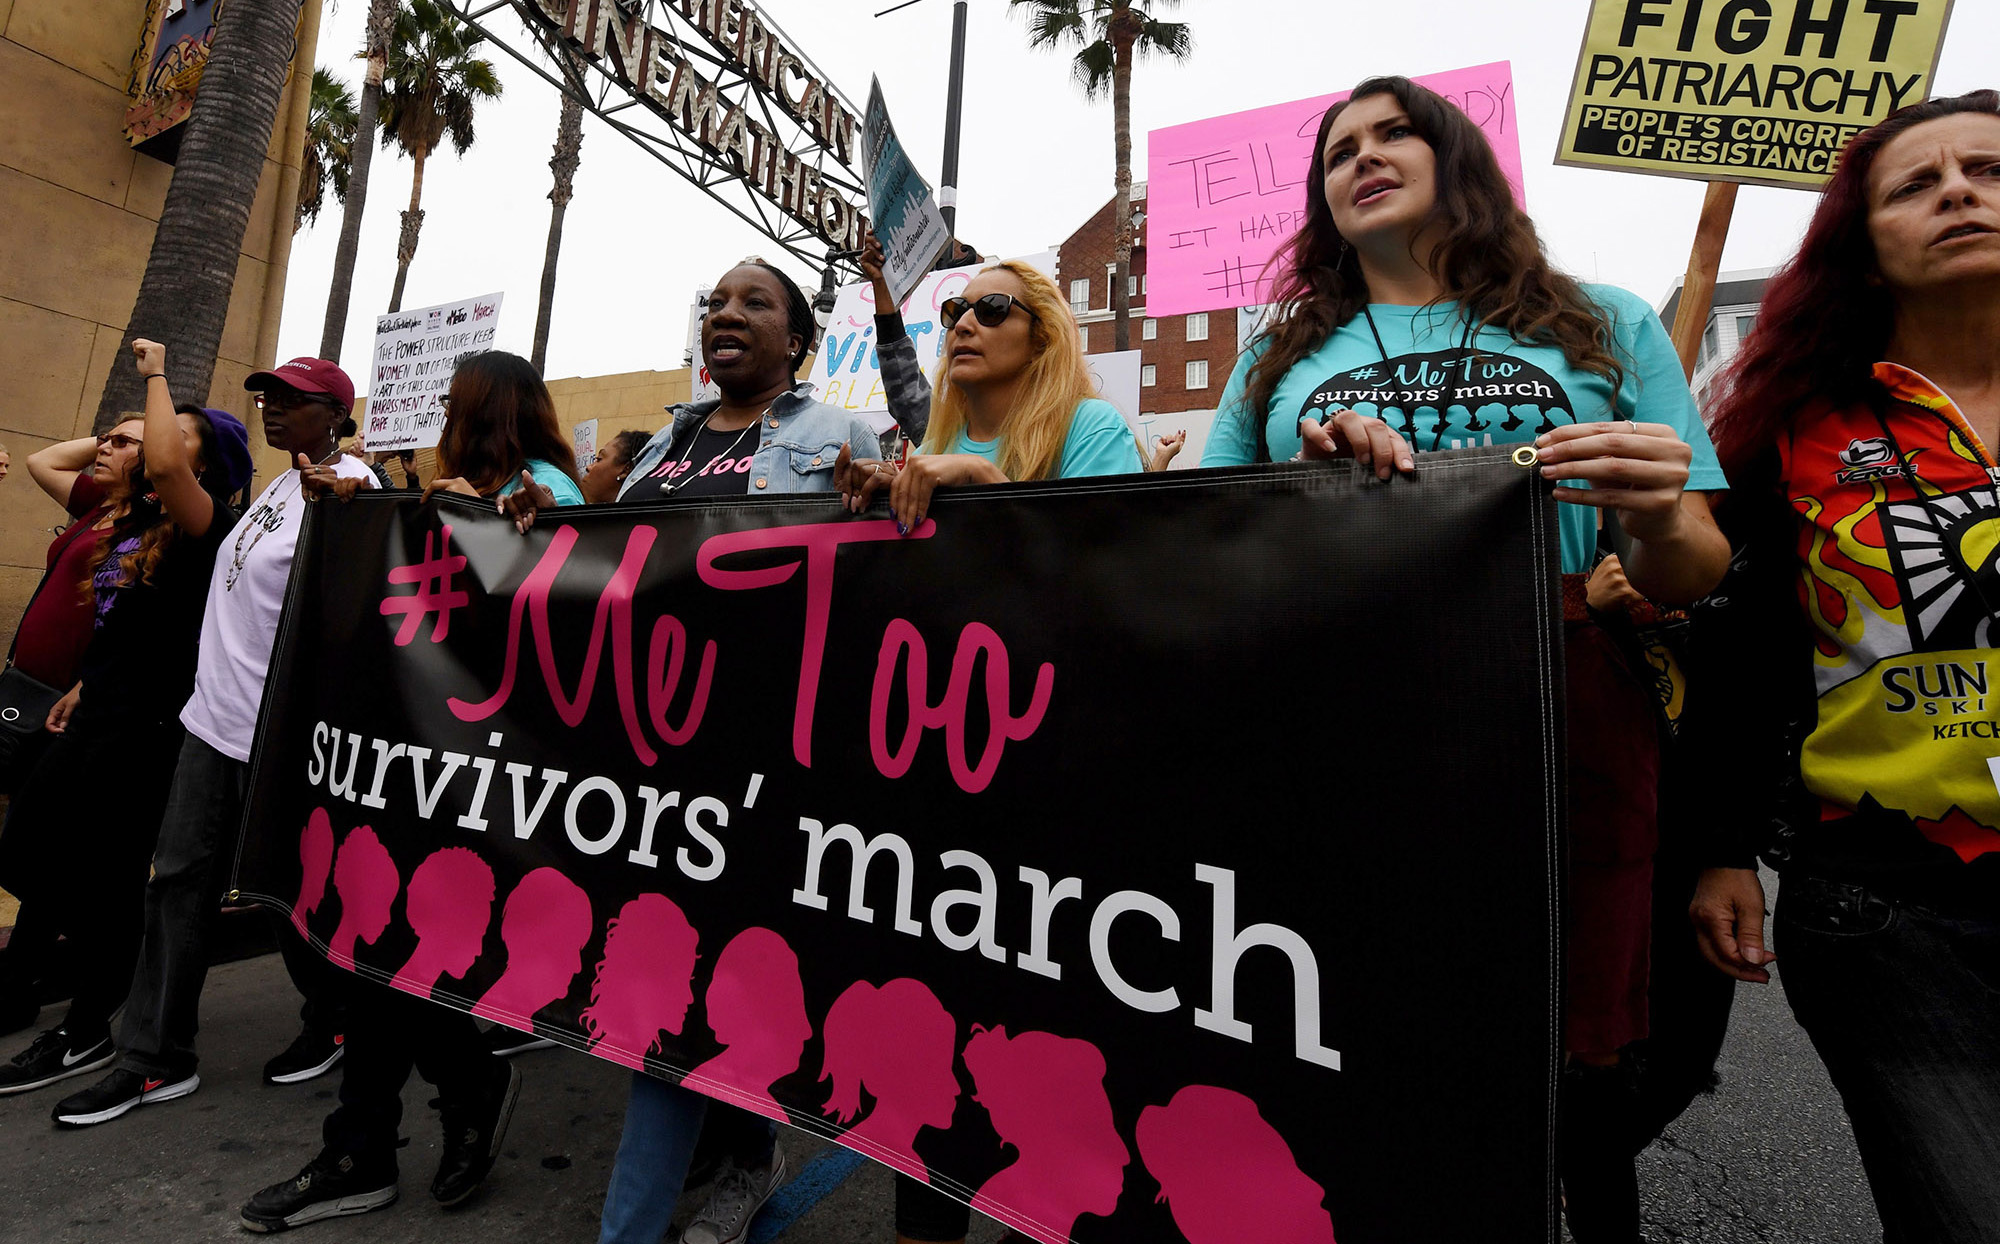 A #MeToo march in Hollywood on Nov. 12, 2017.